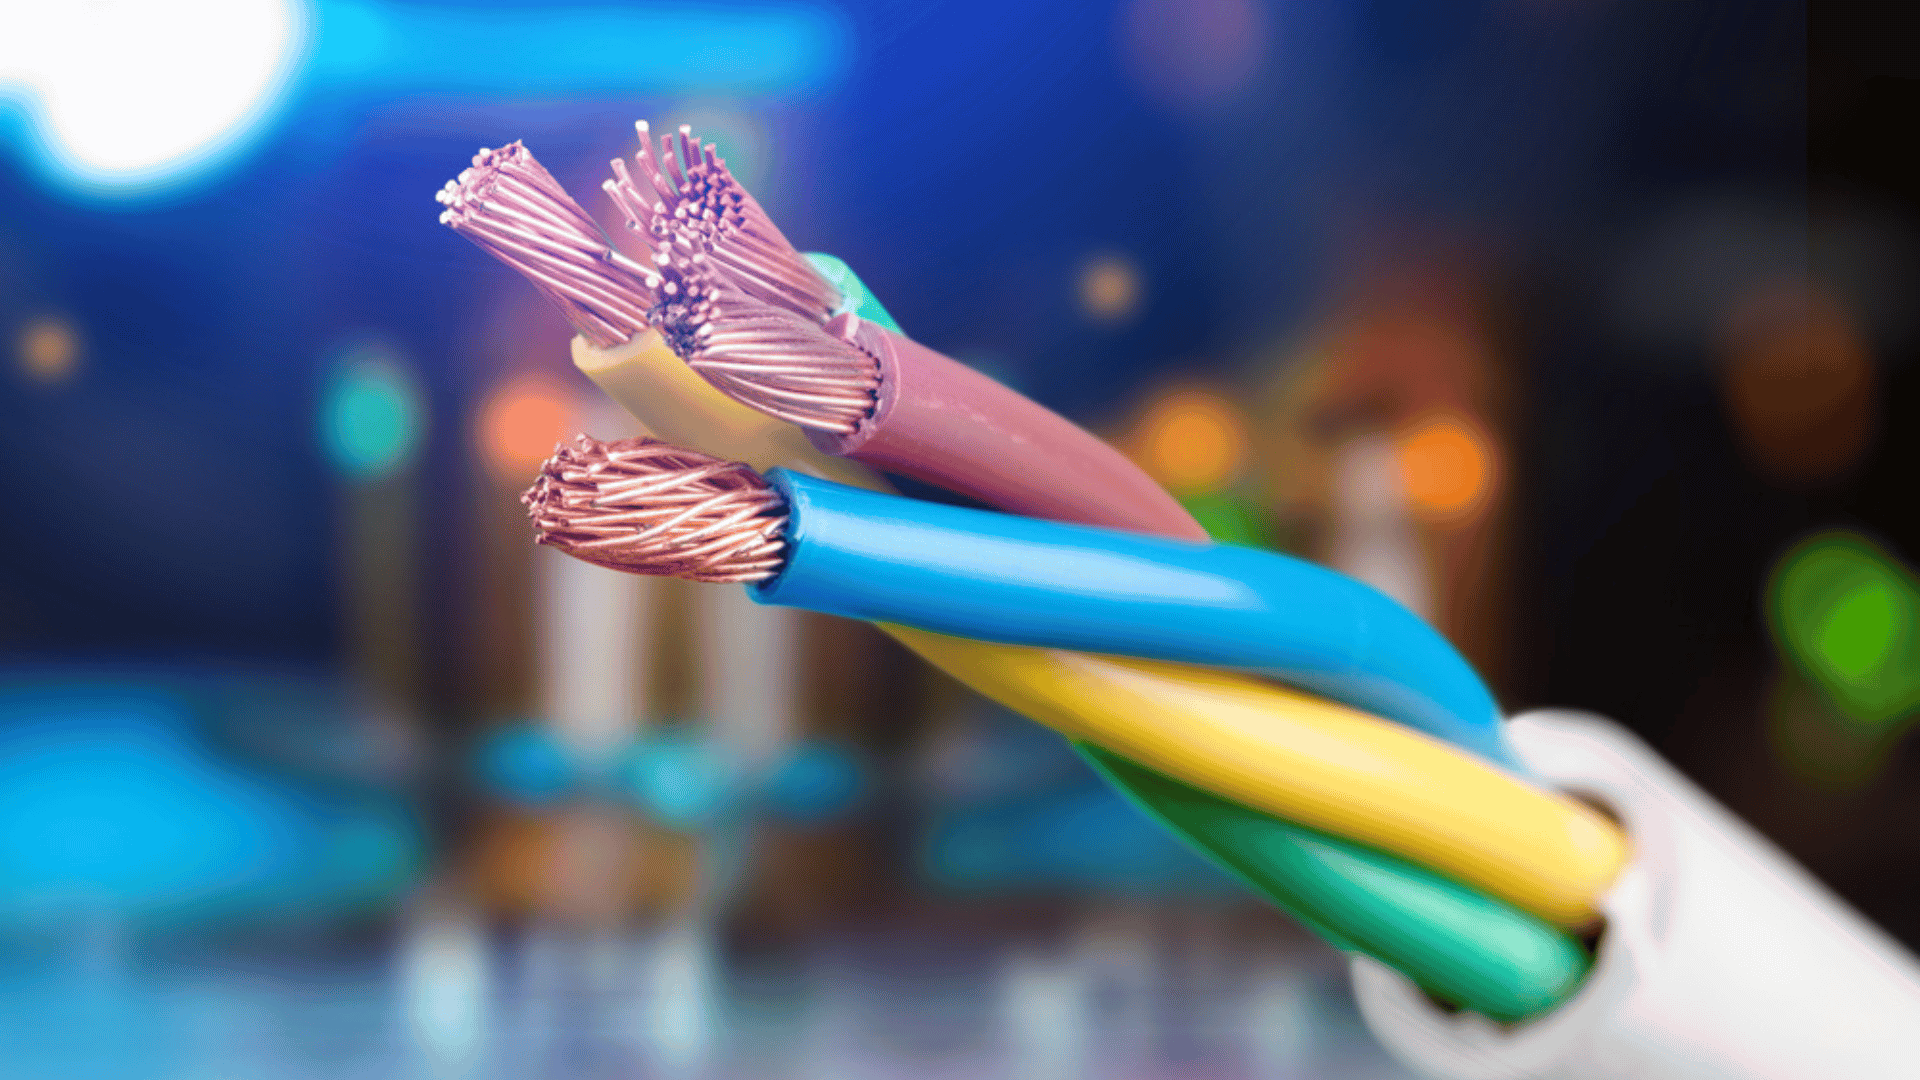 Copper Wires Conducting Electricity